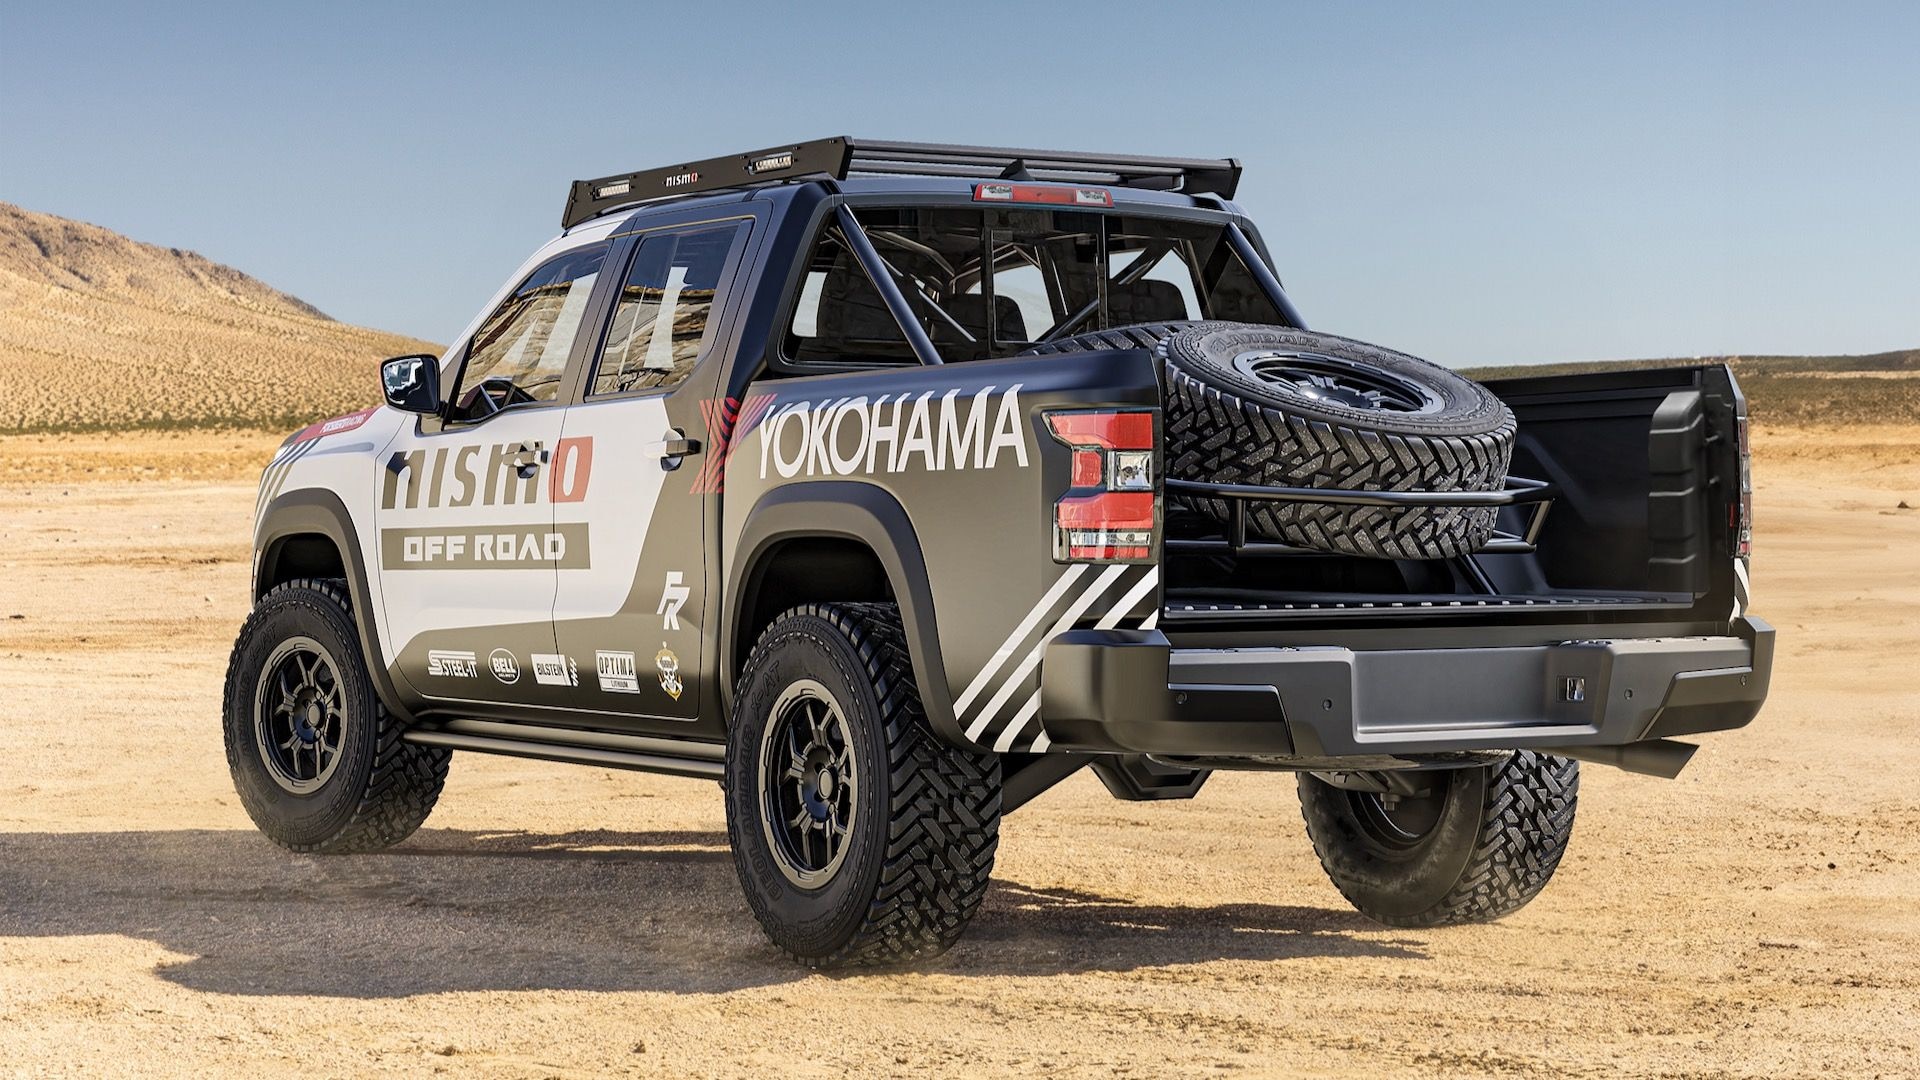 Nissan Frontier off-road concept by Forsberg Racing